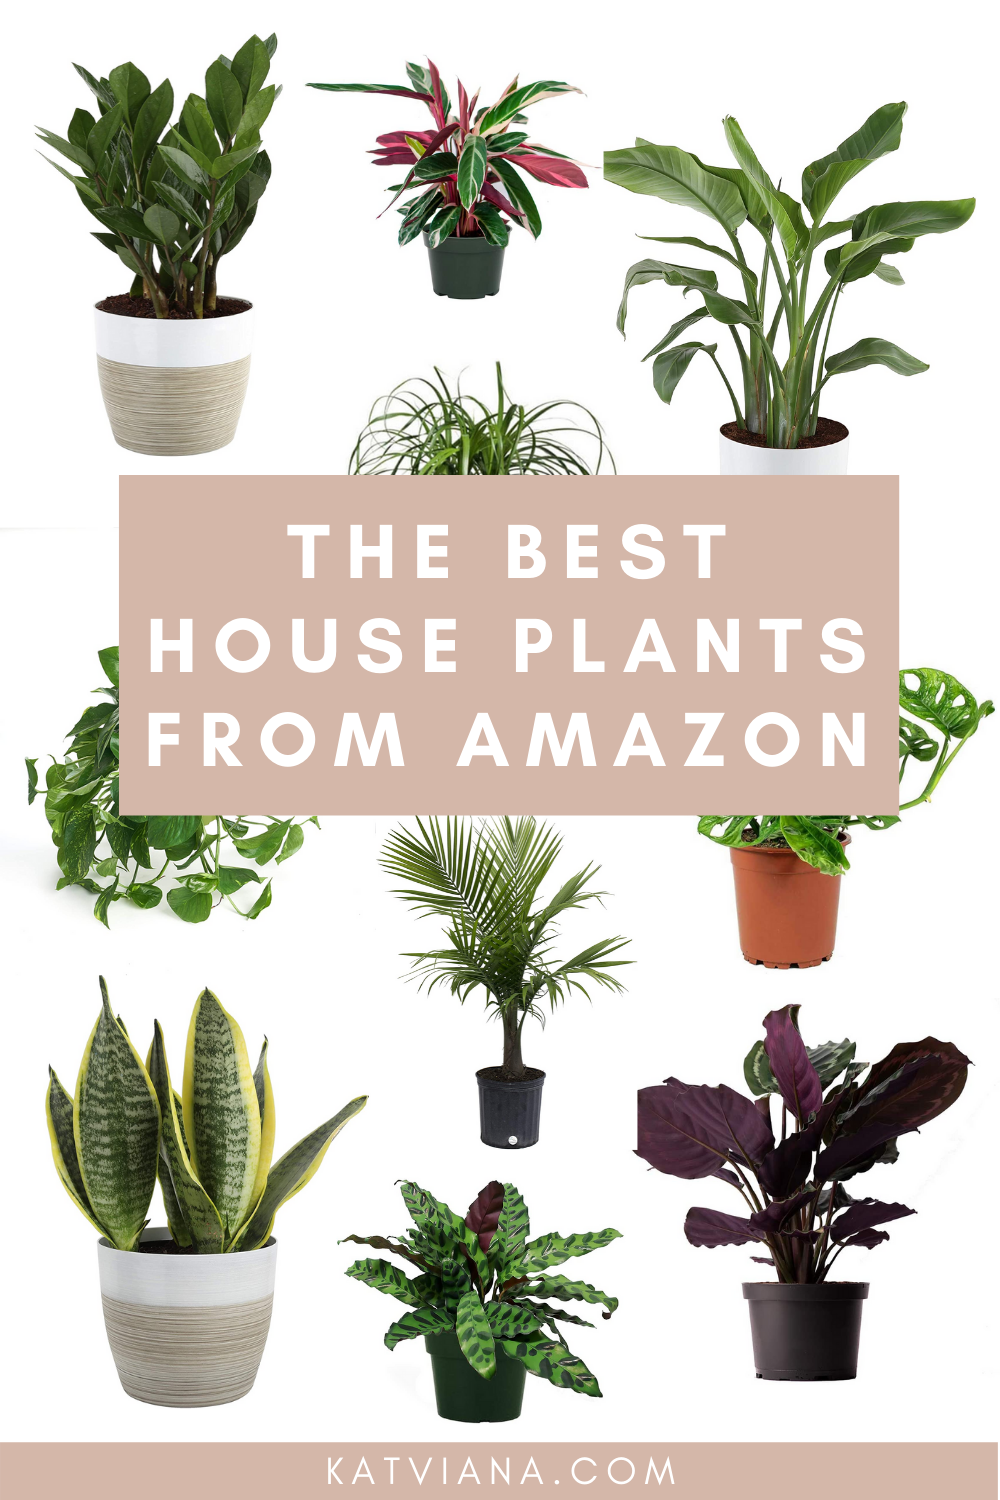 The Best House Plants From Amazon | Kat Viana